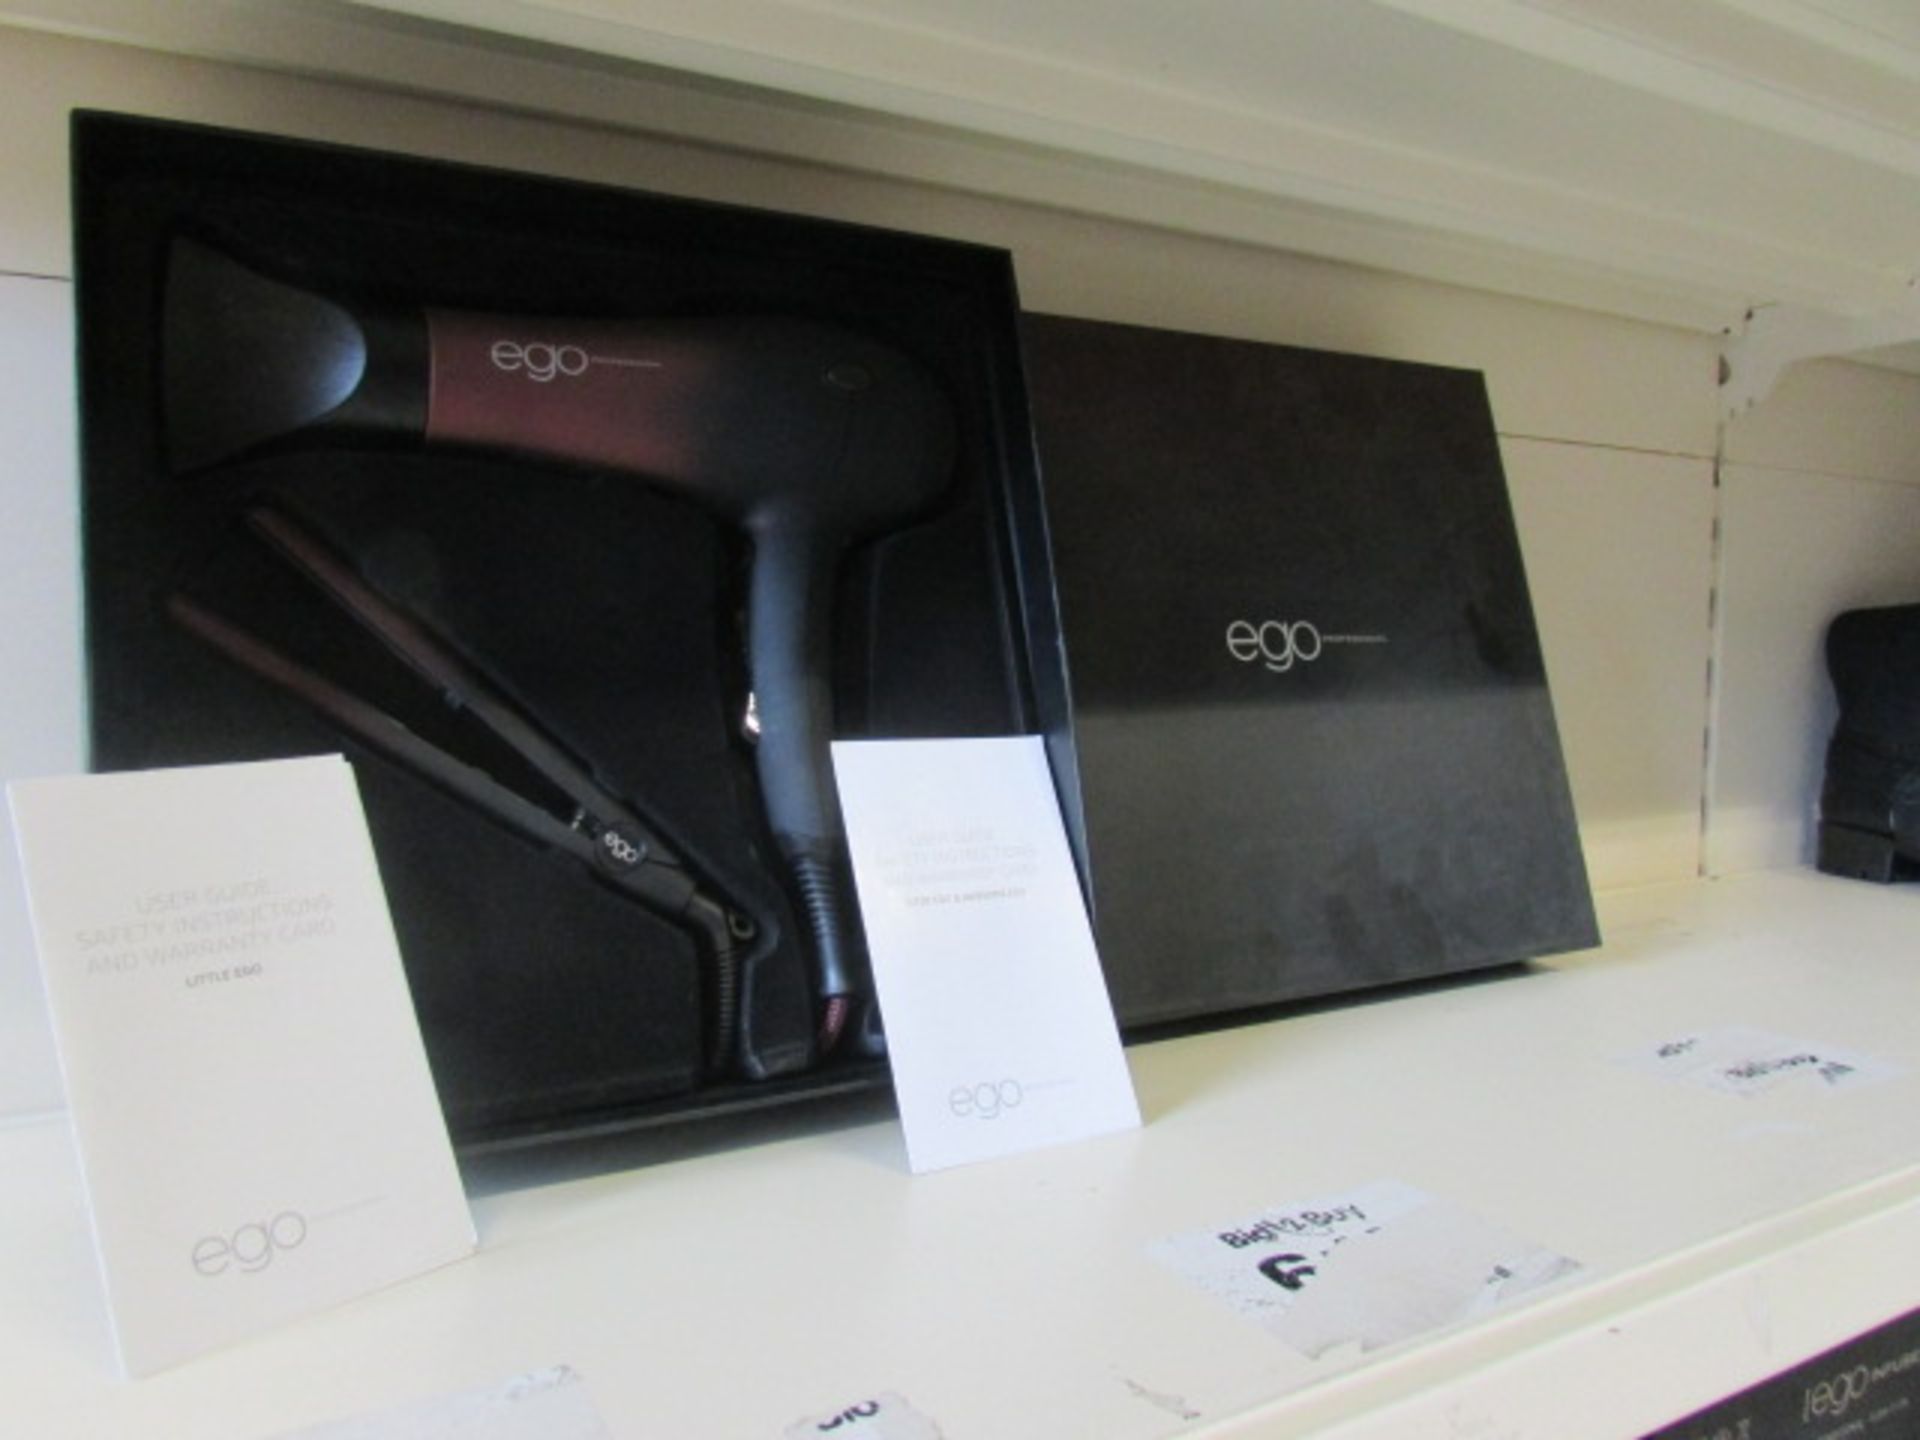 10 x Ego Professional Full On And Fabulous Ego Set (Alter Ego Hairdryer And Little Iron) [Grade A] - Image 3 of 4